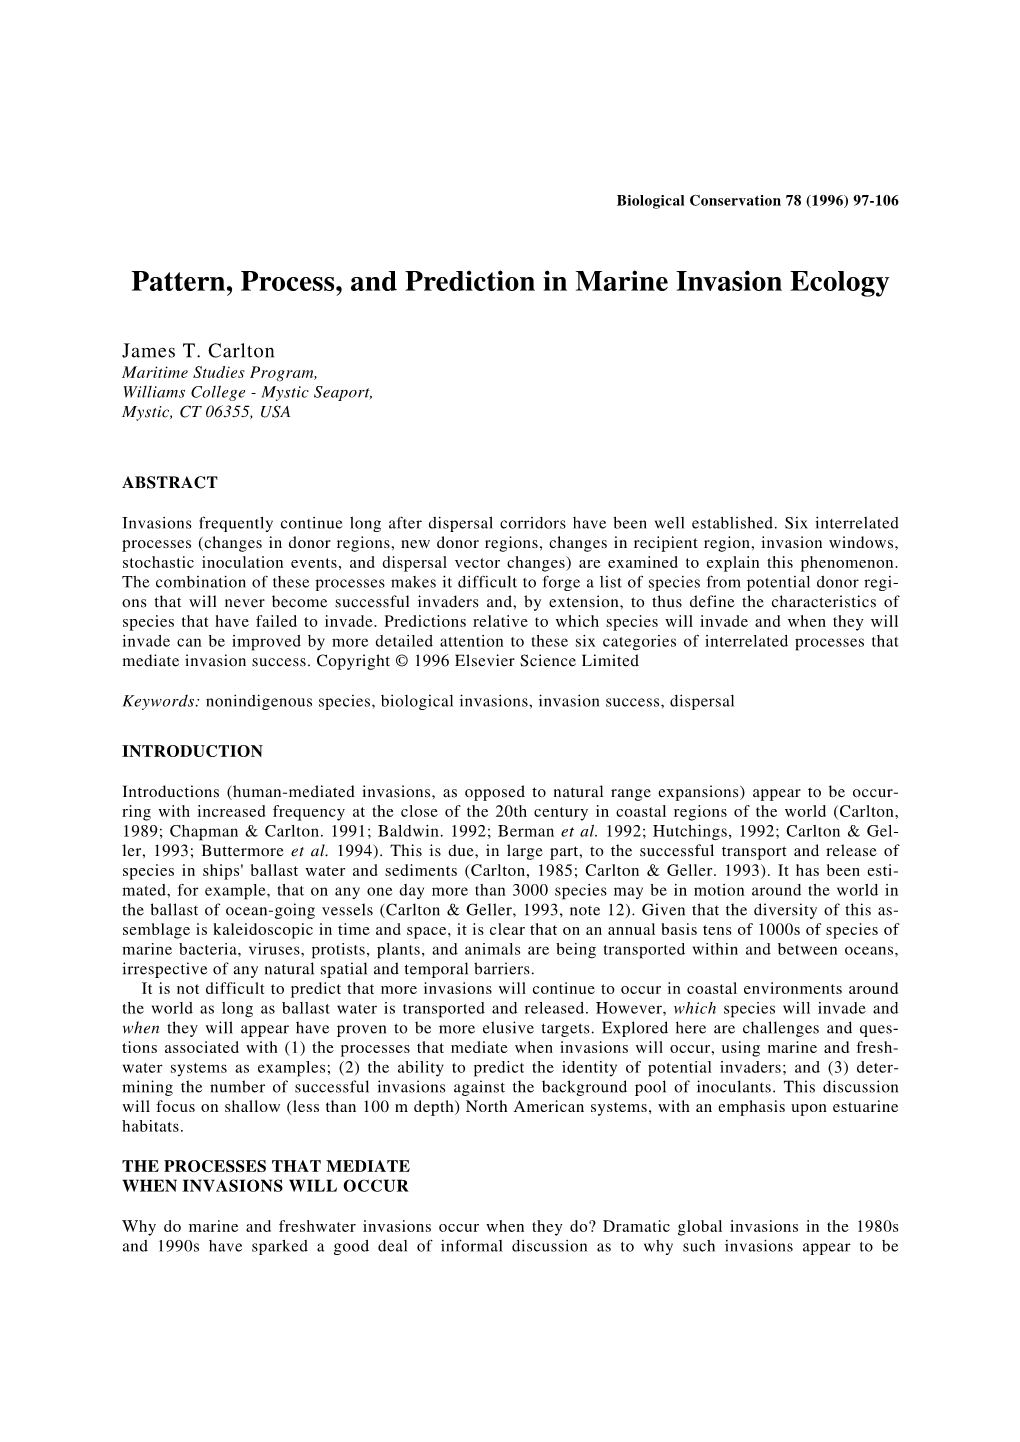 Pattern, Process, and Prediction in Marine Invasion Ecology